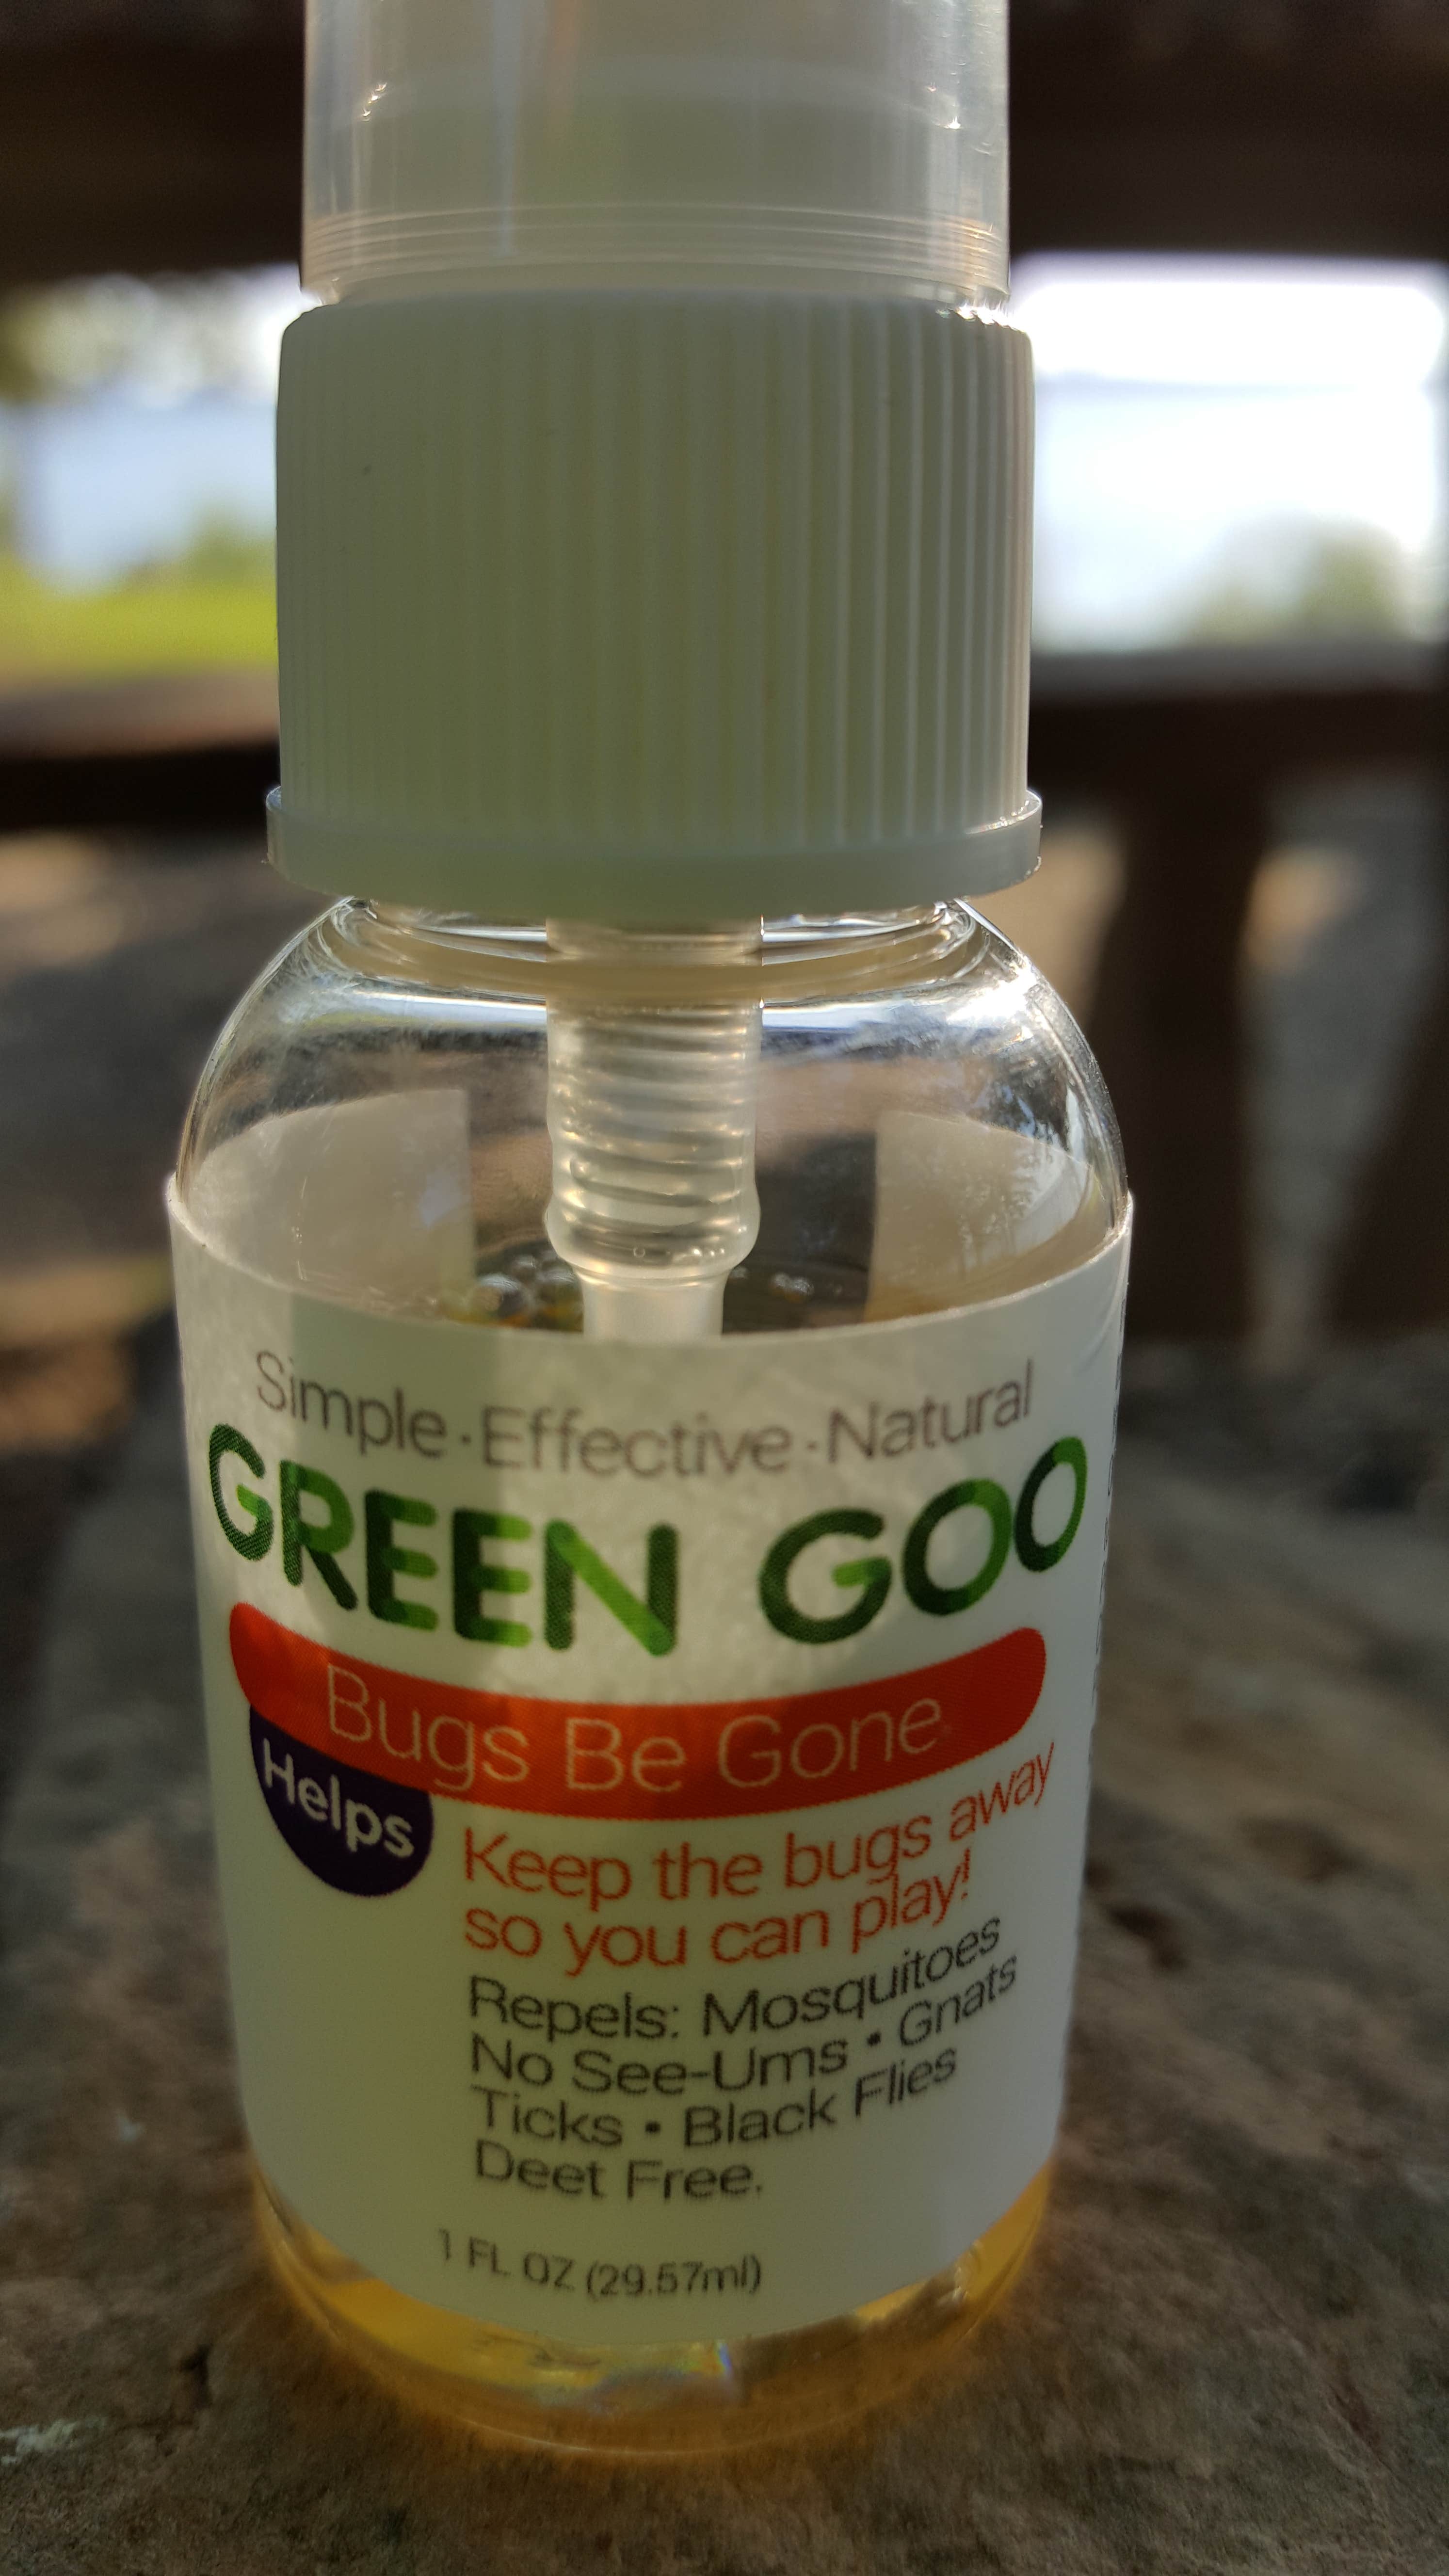 Bug spray a must. Green Goo. Bugs Be Gone is natural and effective. Awesome stuff :)